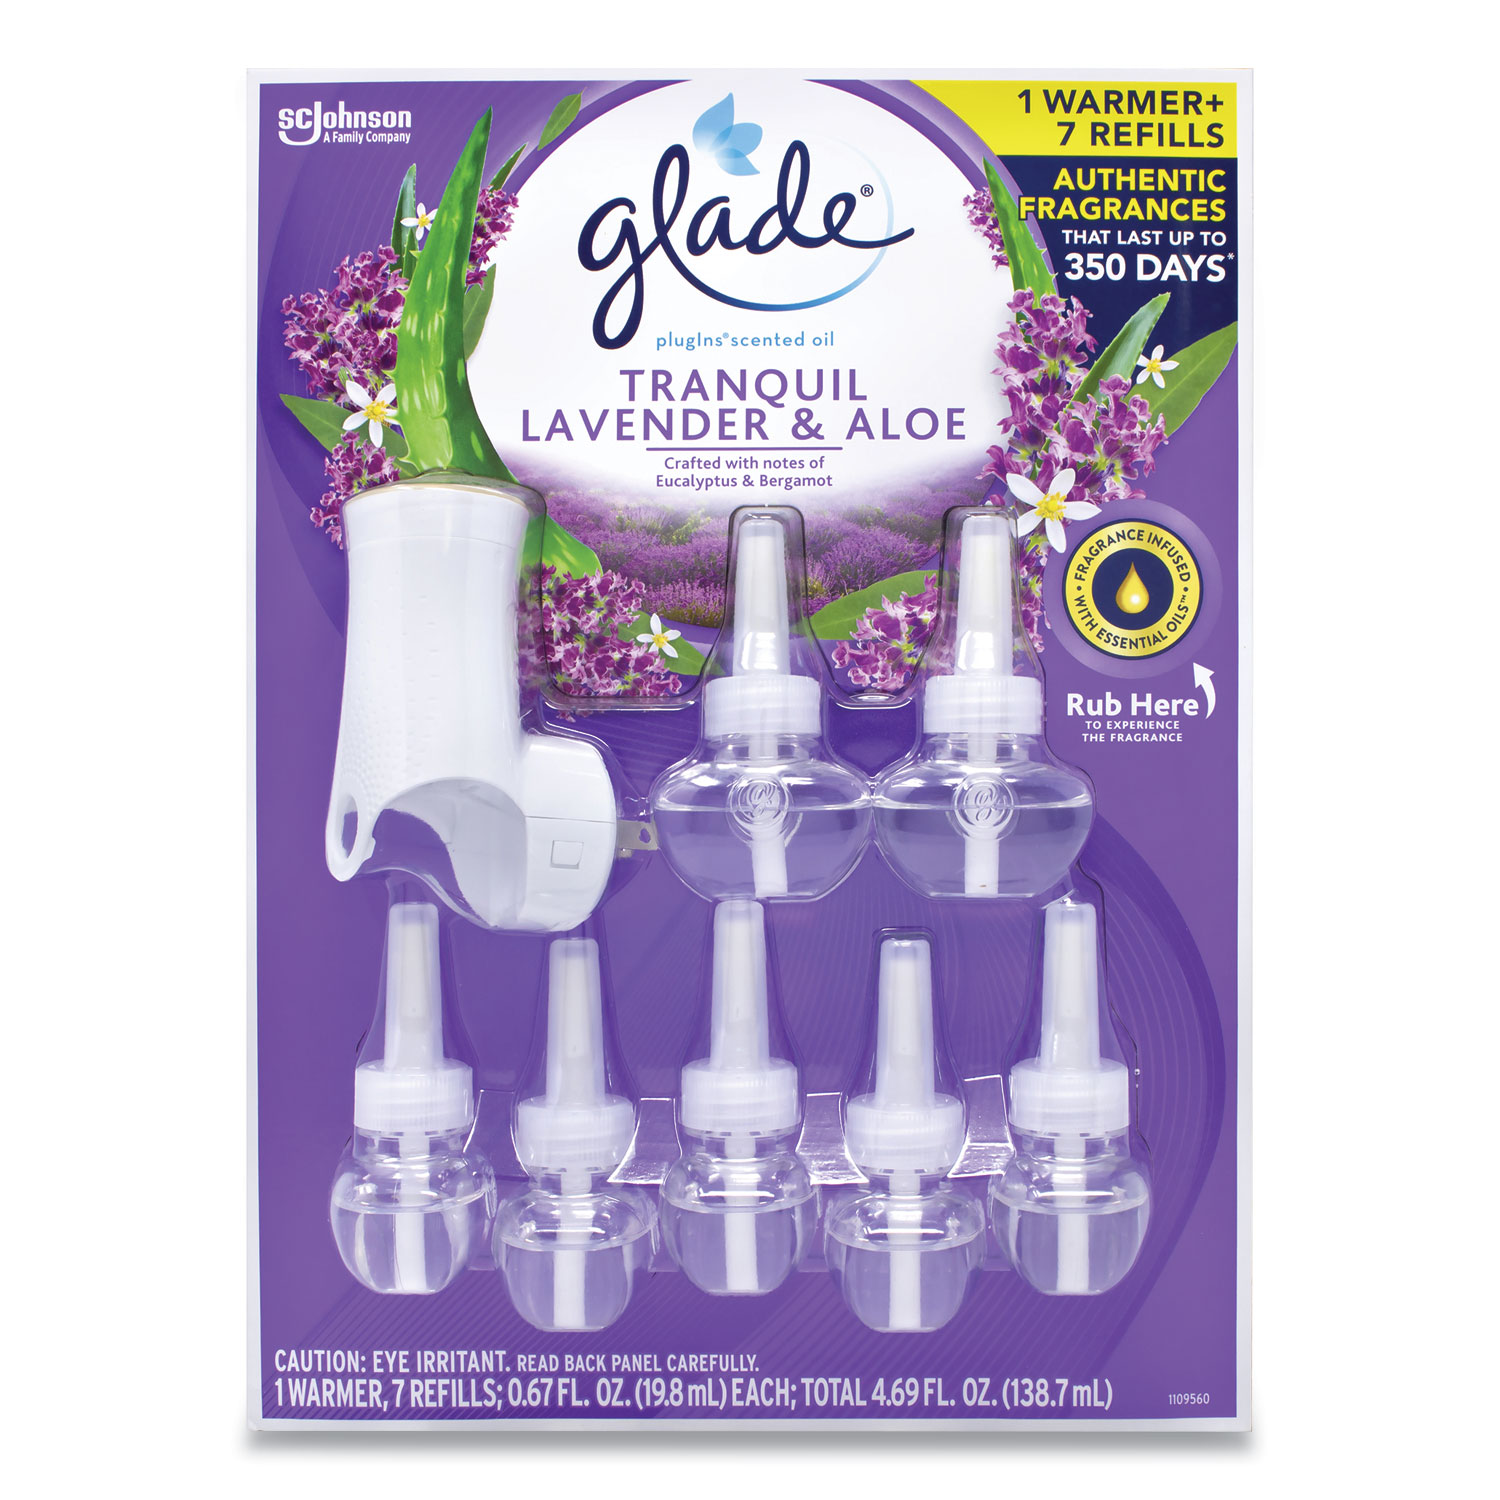  Glade 02309 PlugIns Scented Oil Warmer and Refills, 1 Warmer/7 Refills, Lavender and Aloe, 0.67 oz, Free Delivery in 1-4 Business Days (GRR22001105) 